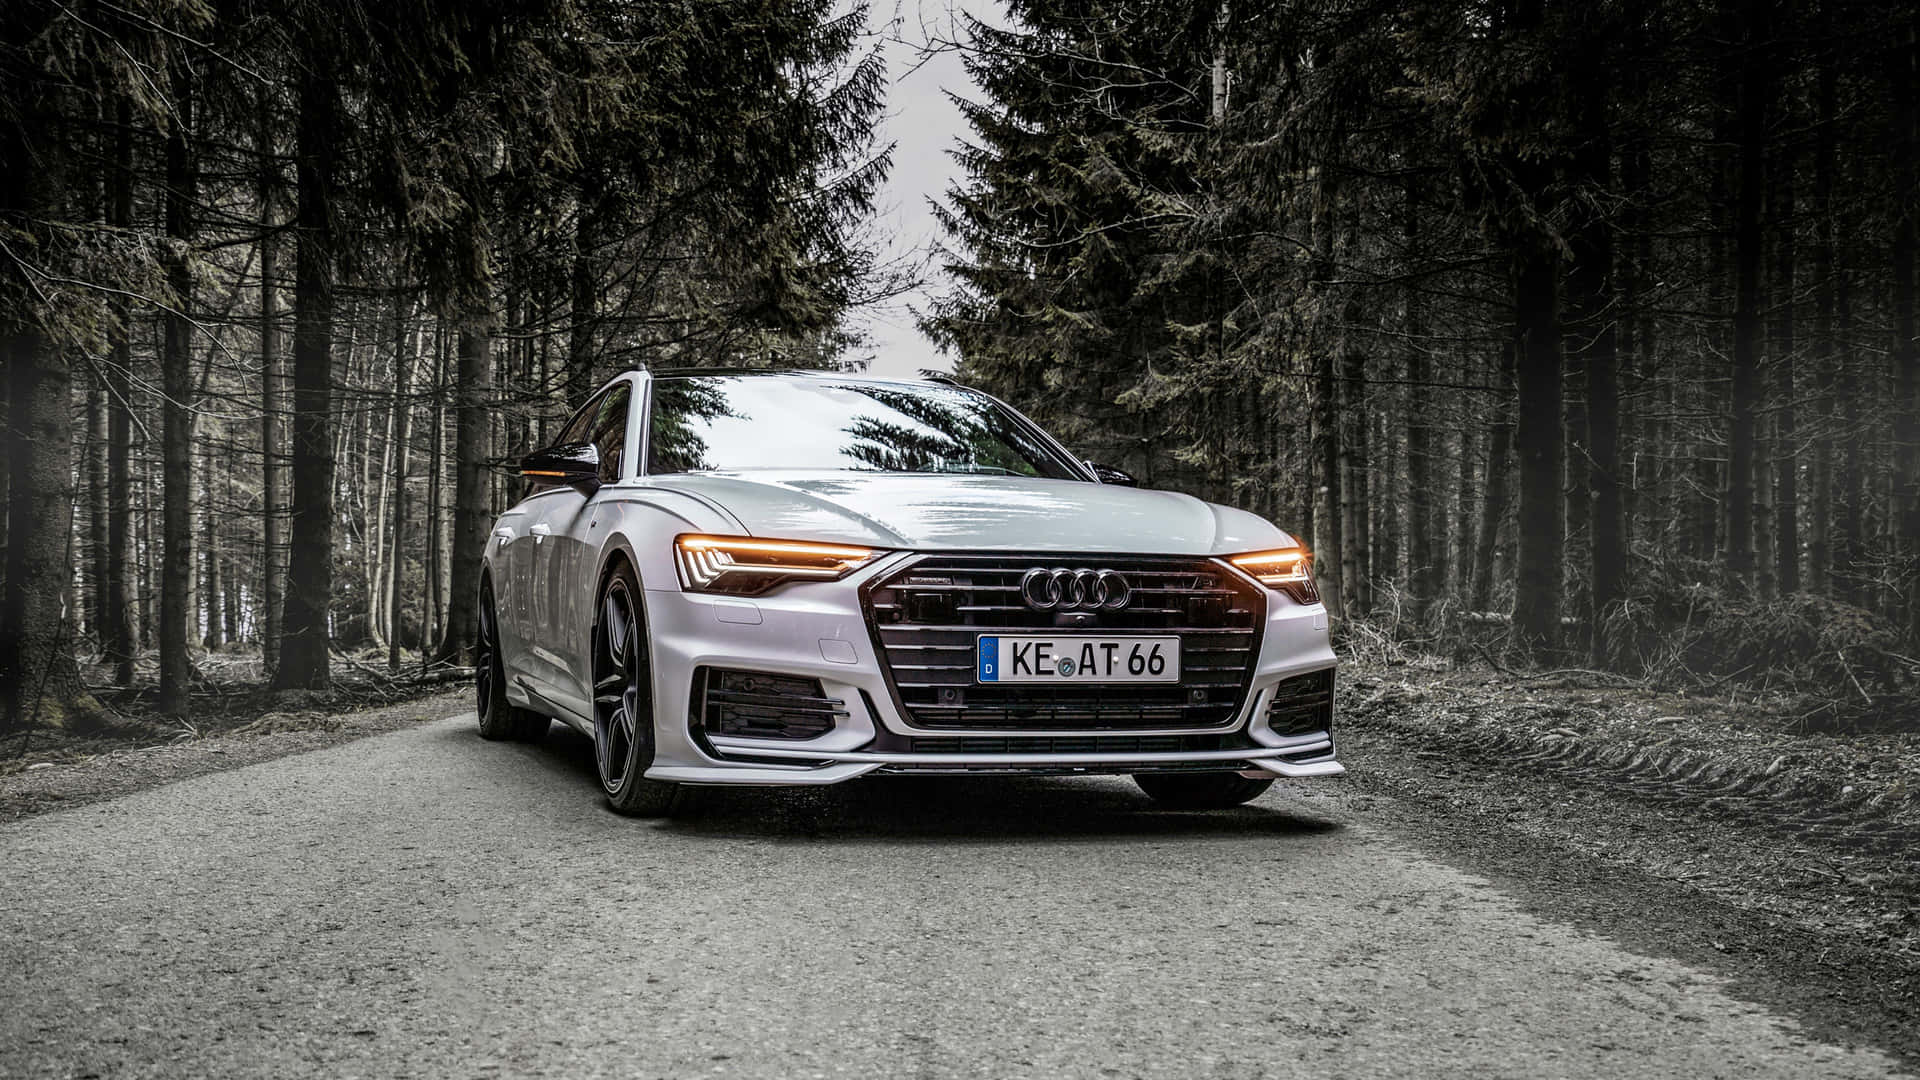 Sleek And Sophisticated Audi A6 Cruising Down A Beautiful Swept Road. Wallpaper